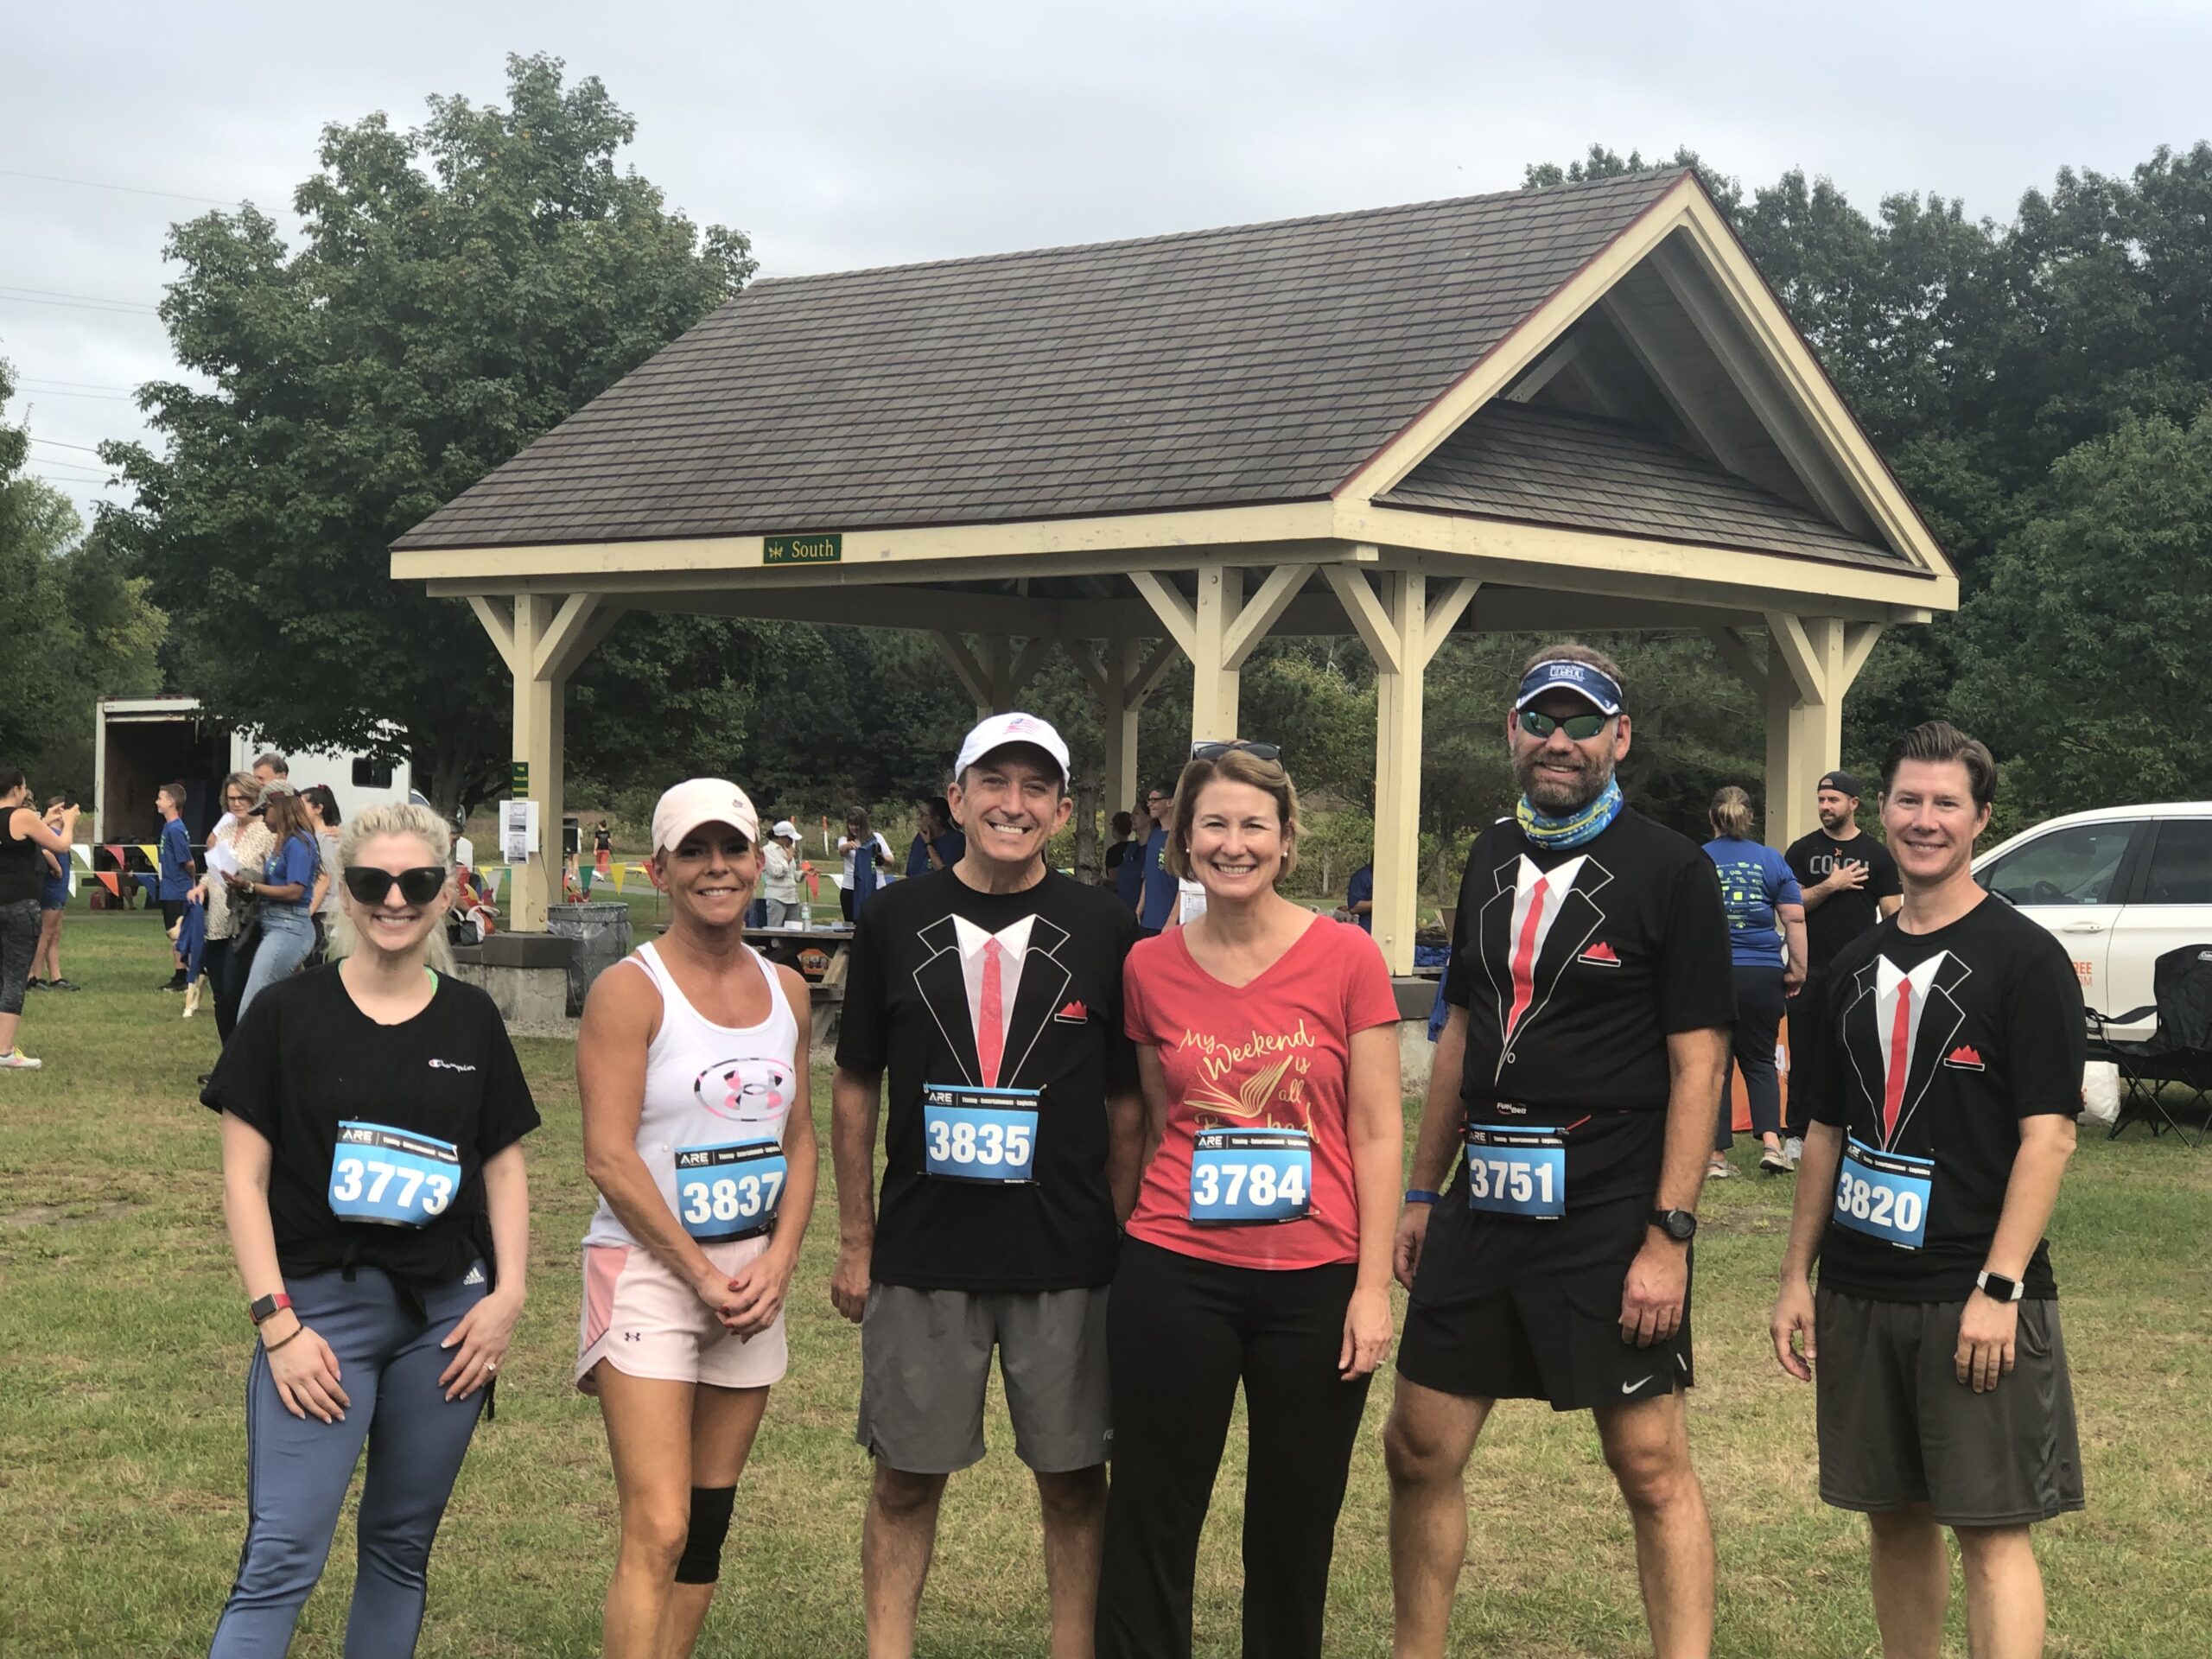 Members of the firm at the 2021 Law Day Run.